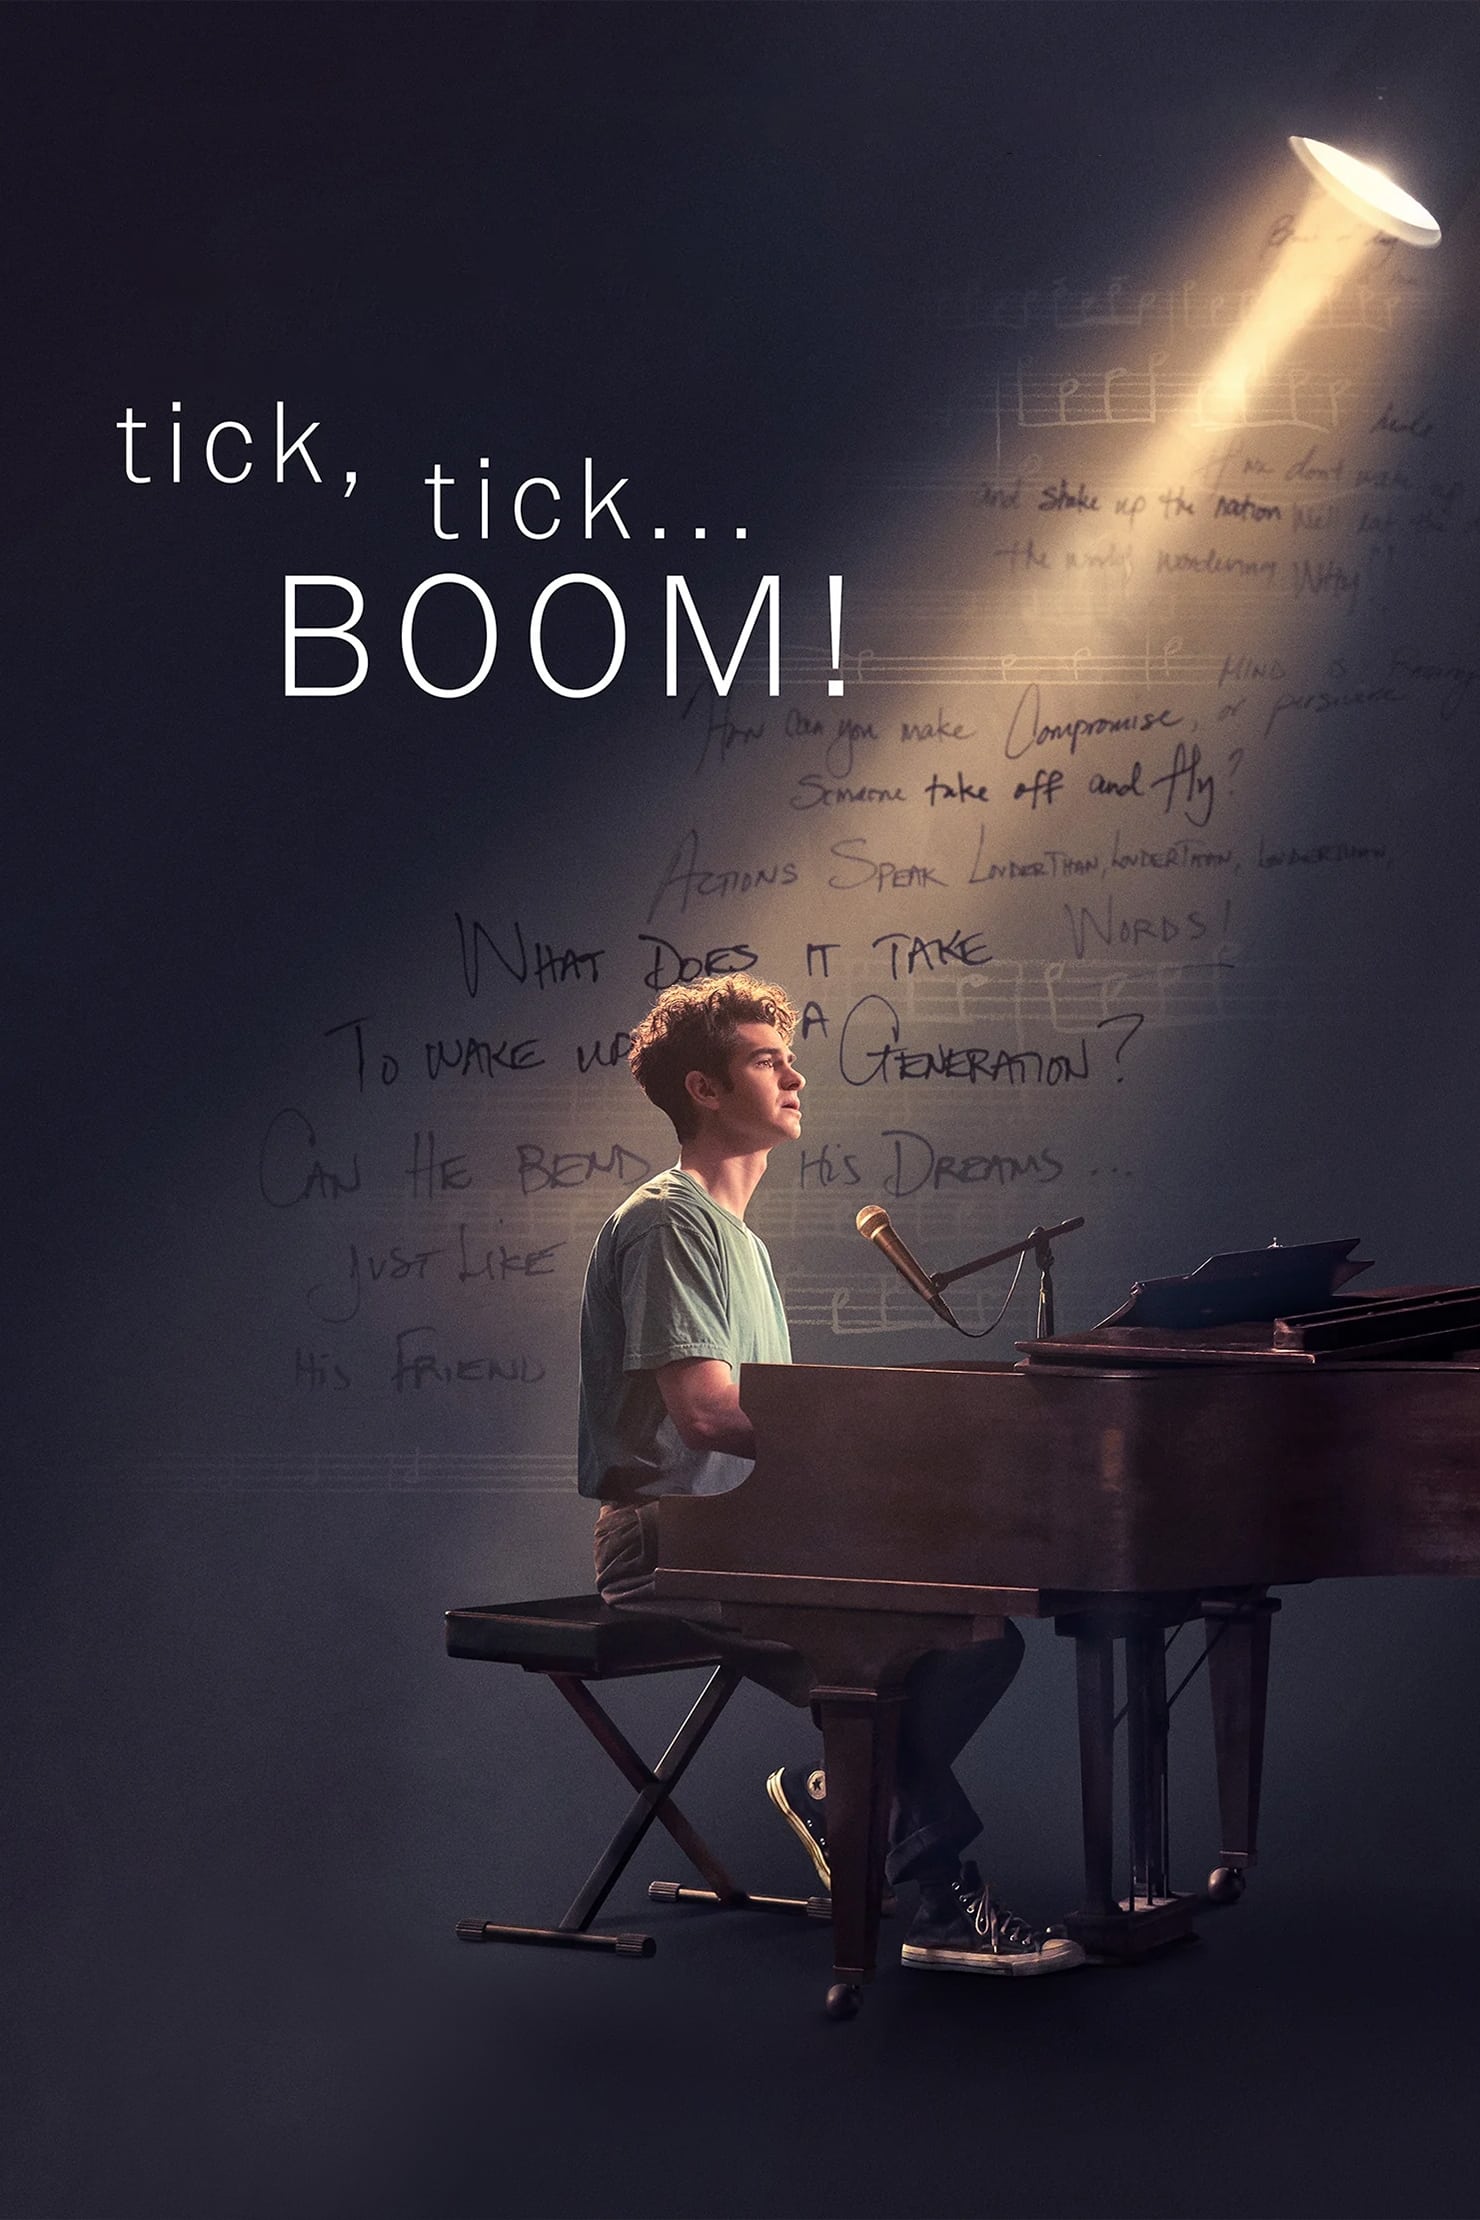 Poster for the movie "tick, tick...BOOM!"